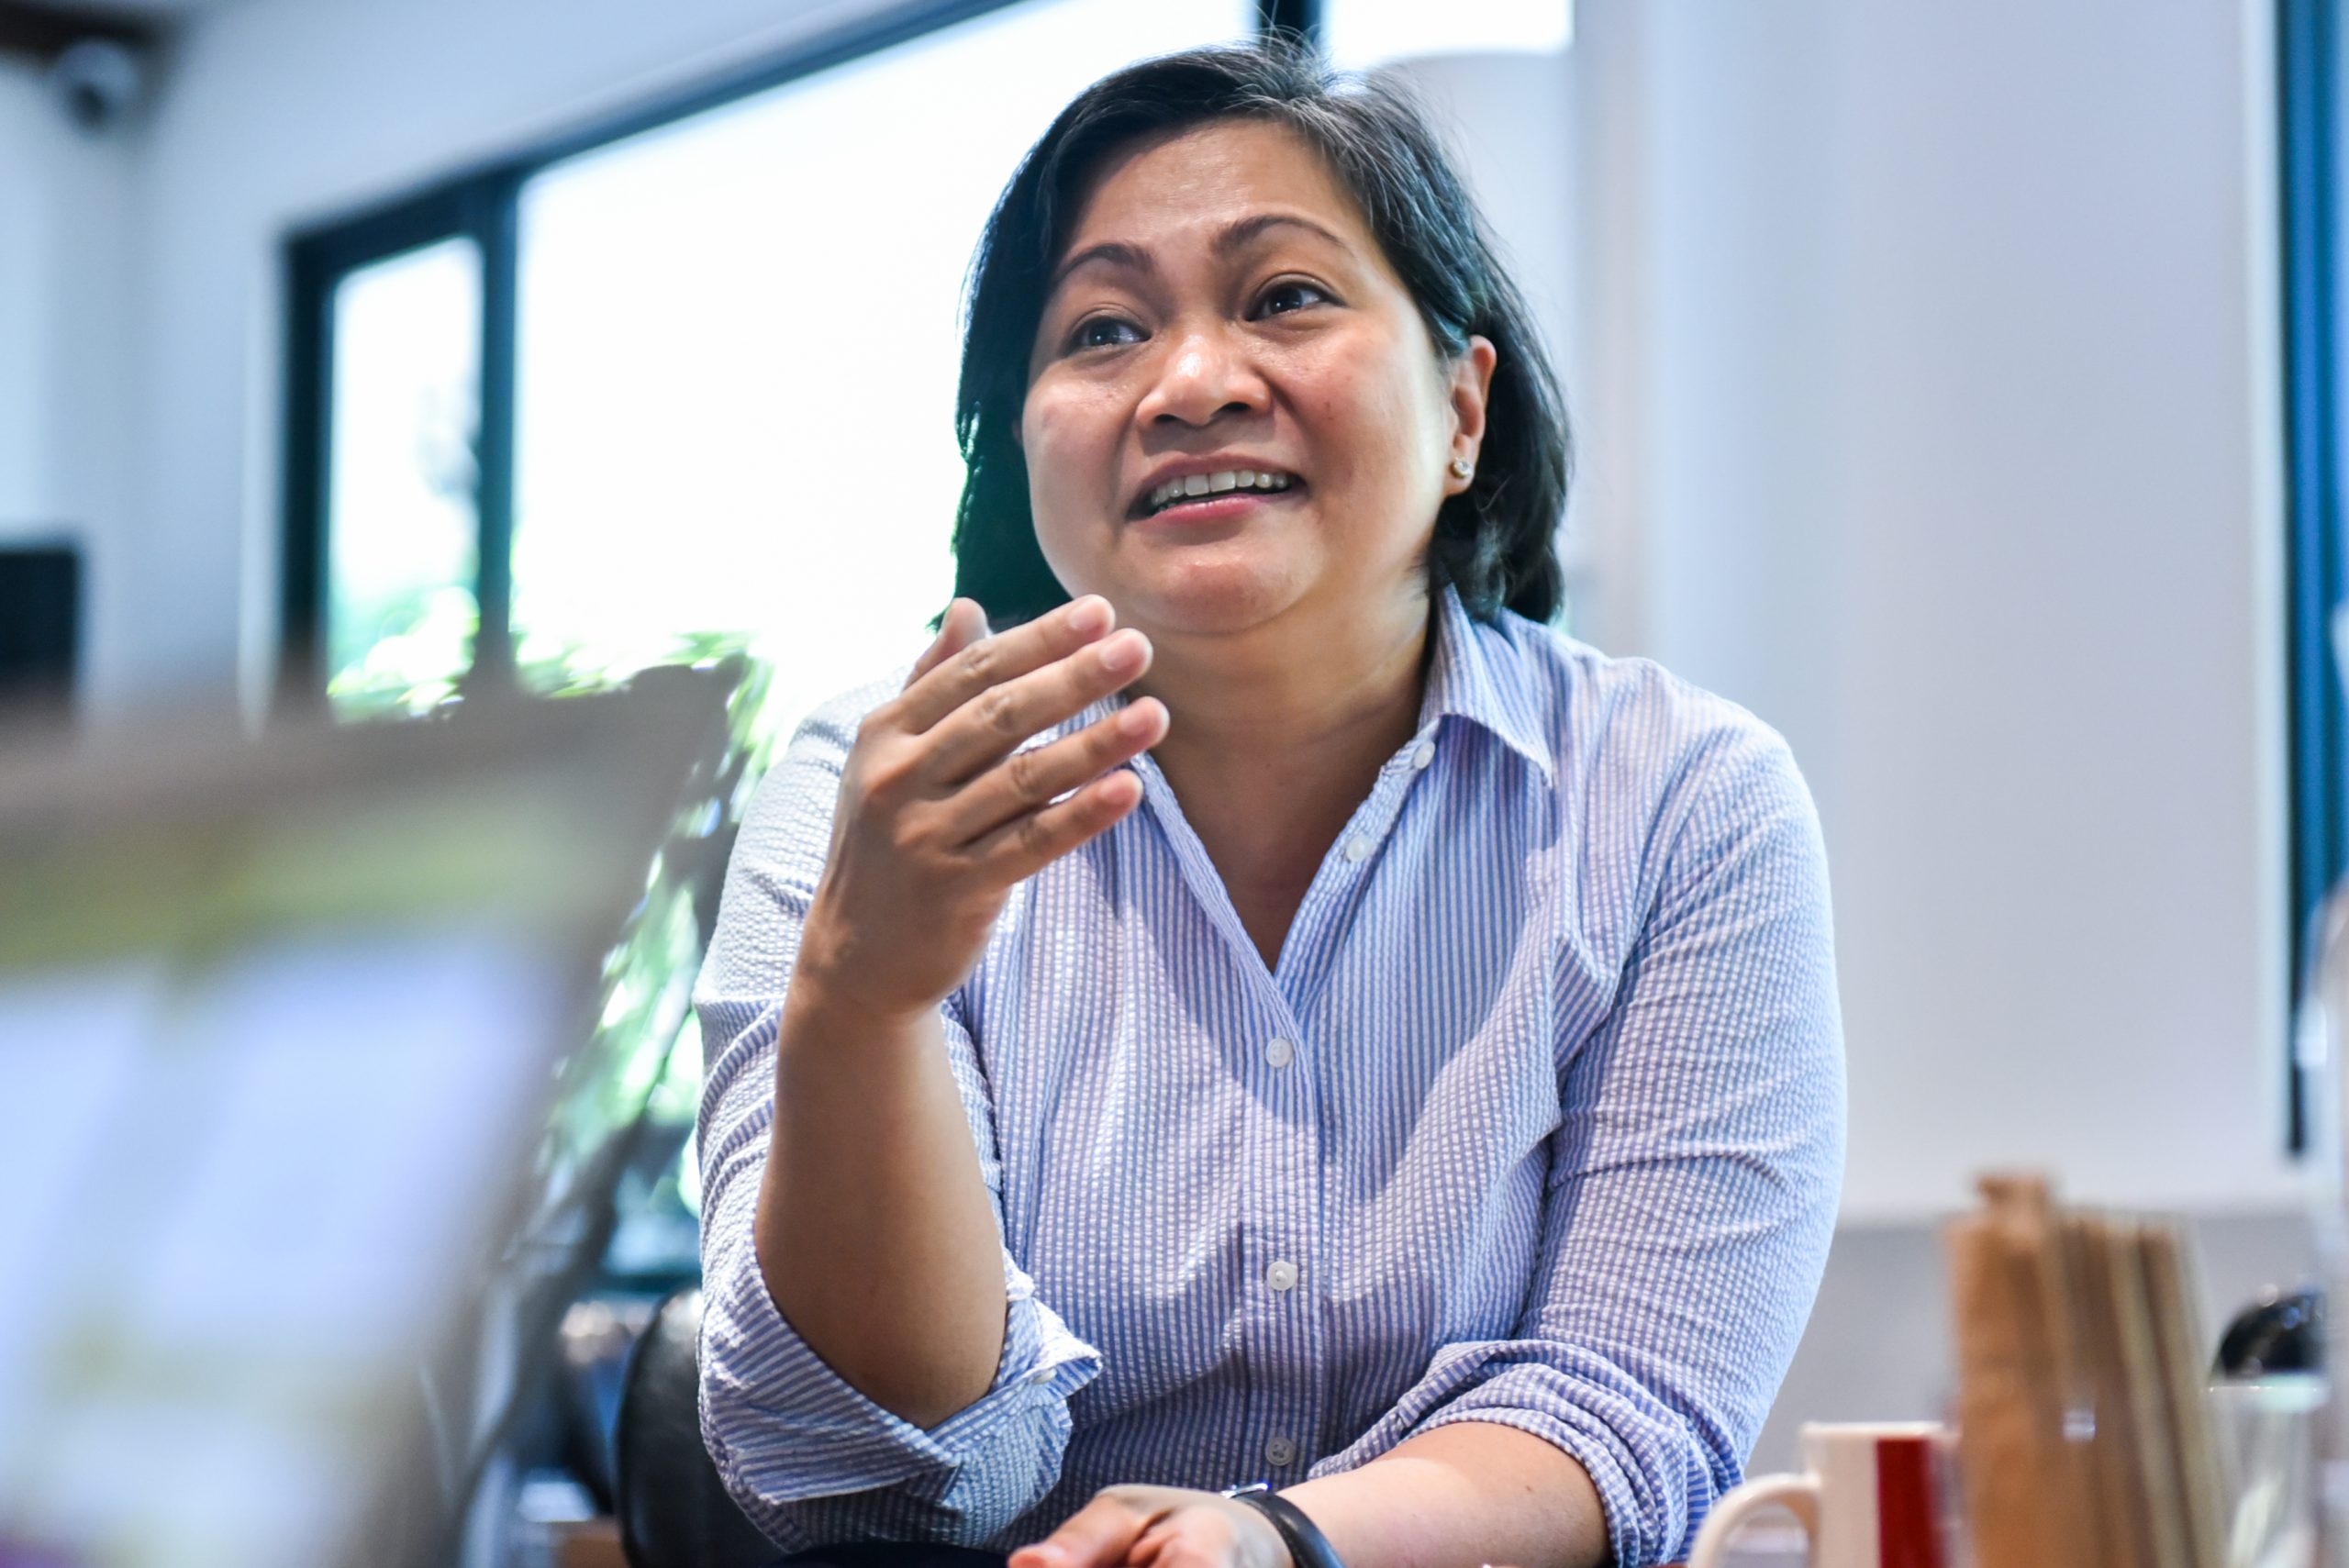 The fund is a signal that the Philippines is ready, says Kickstart Ventures’ Minette Navarrete